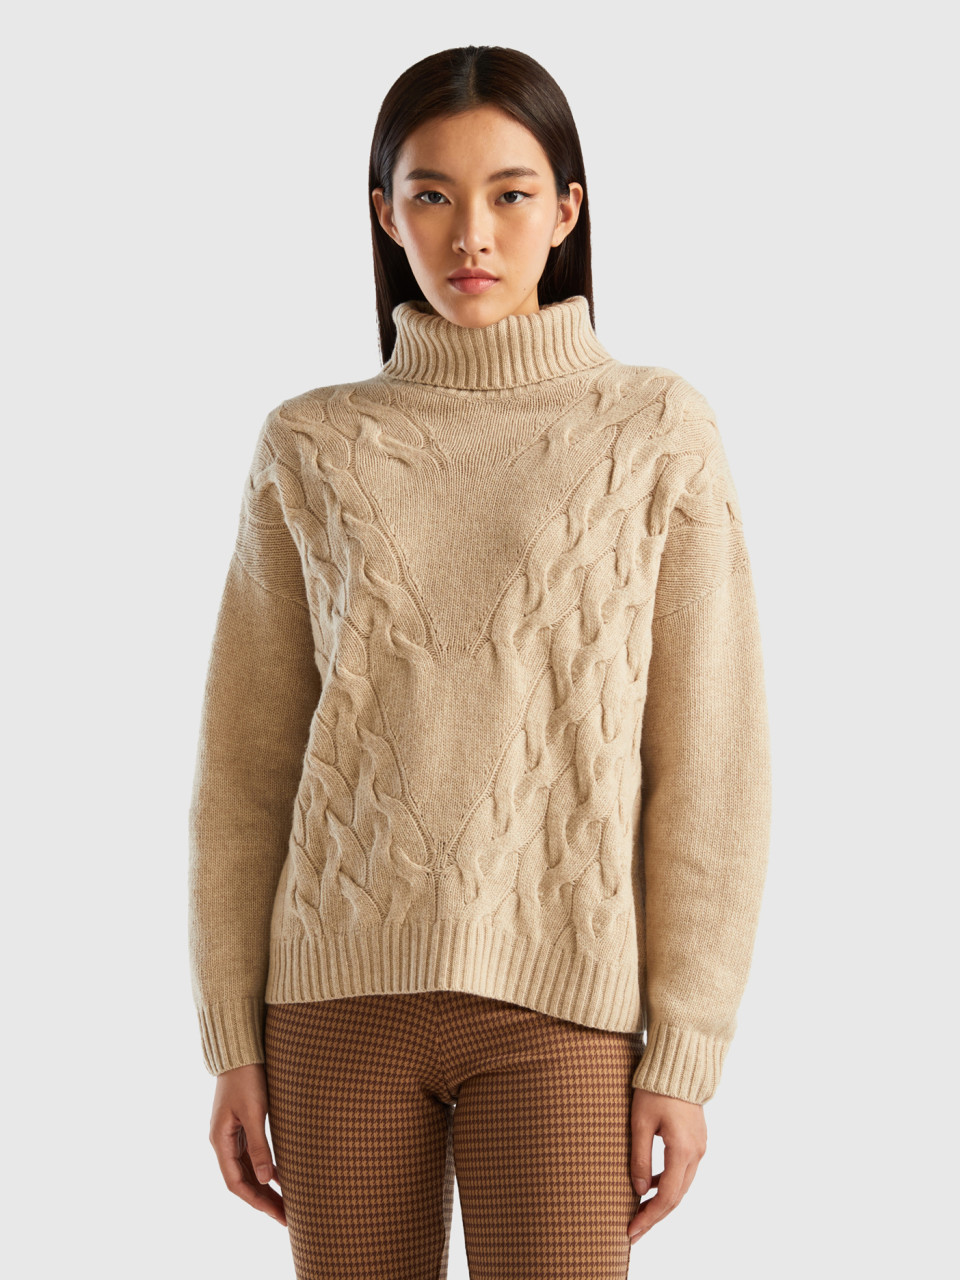 Benetton, Turtleneck With Cables, Beige, Women